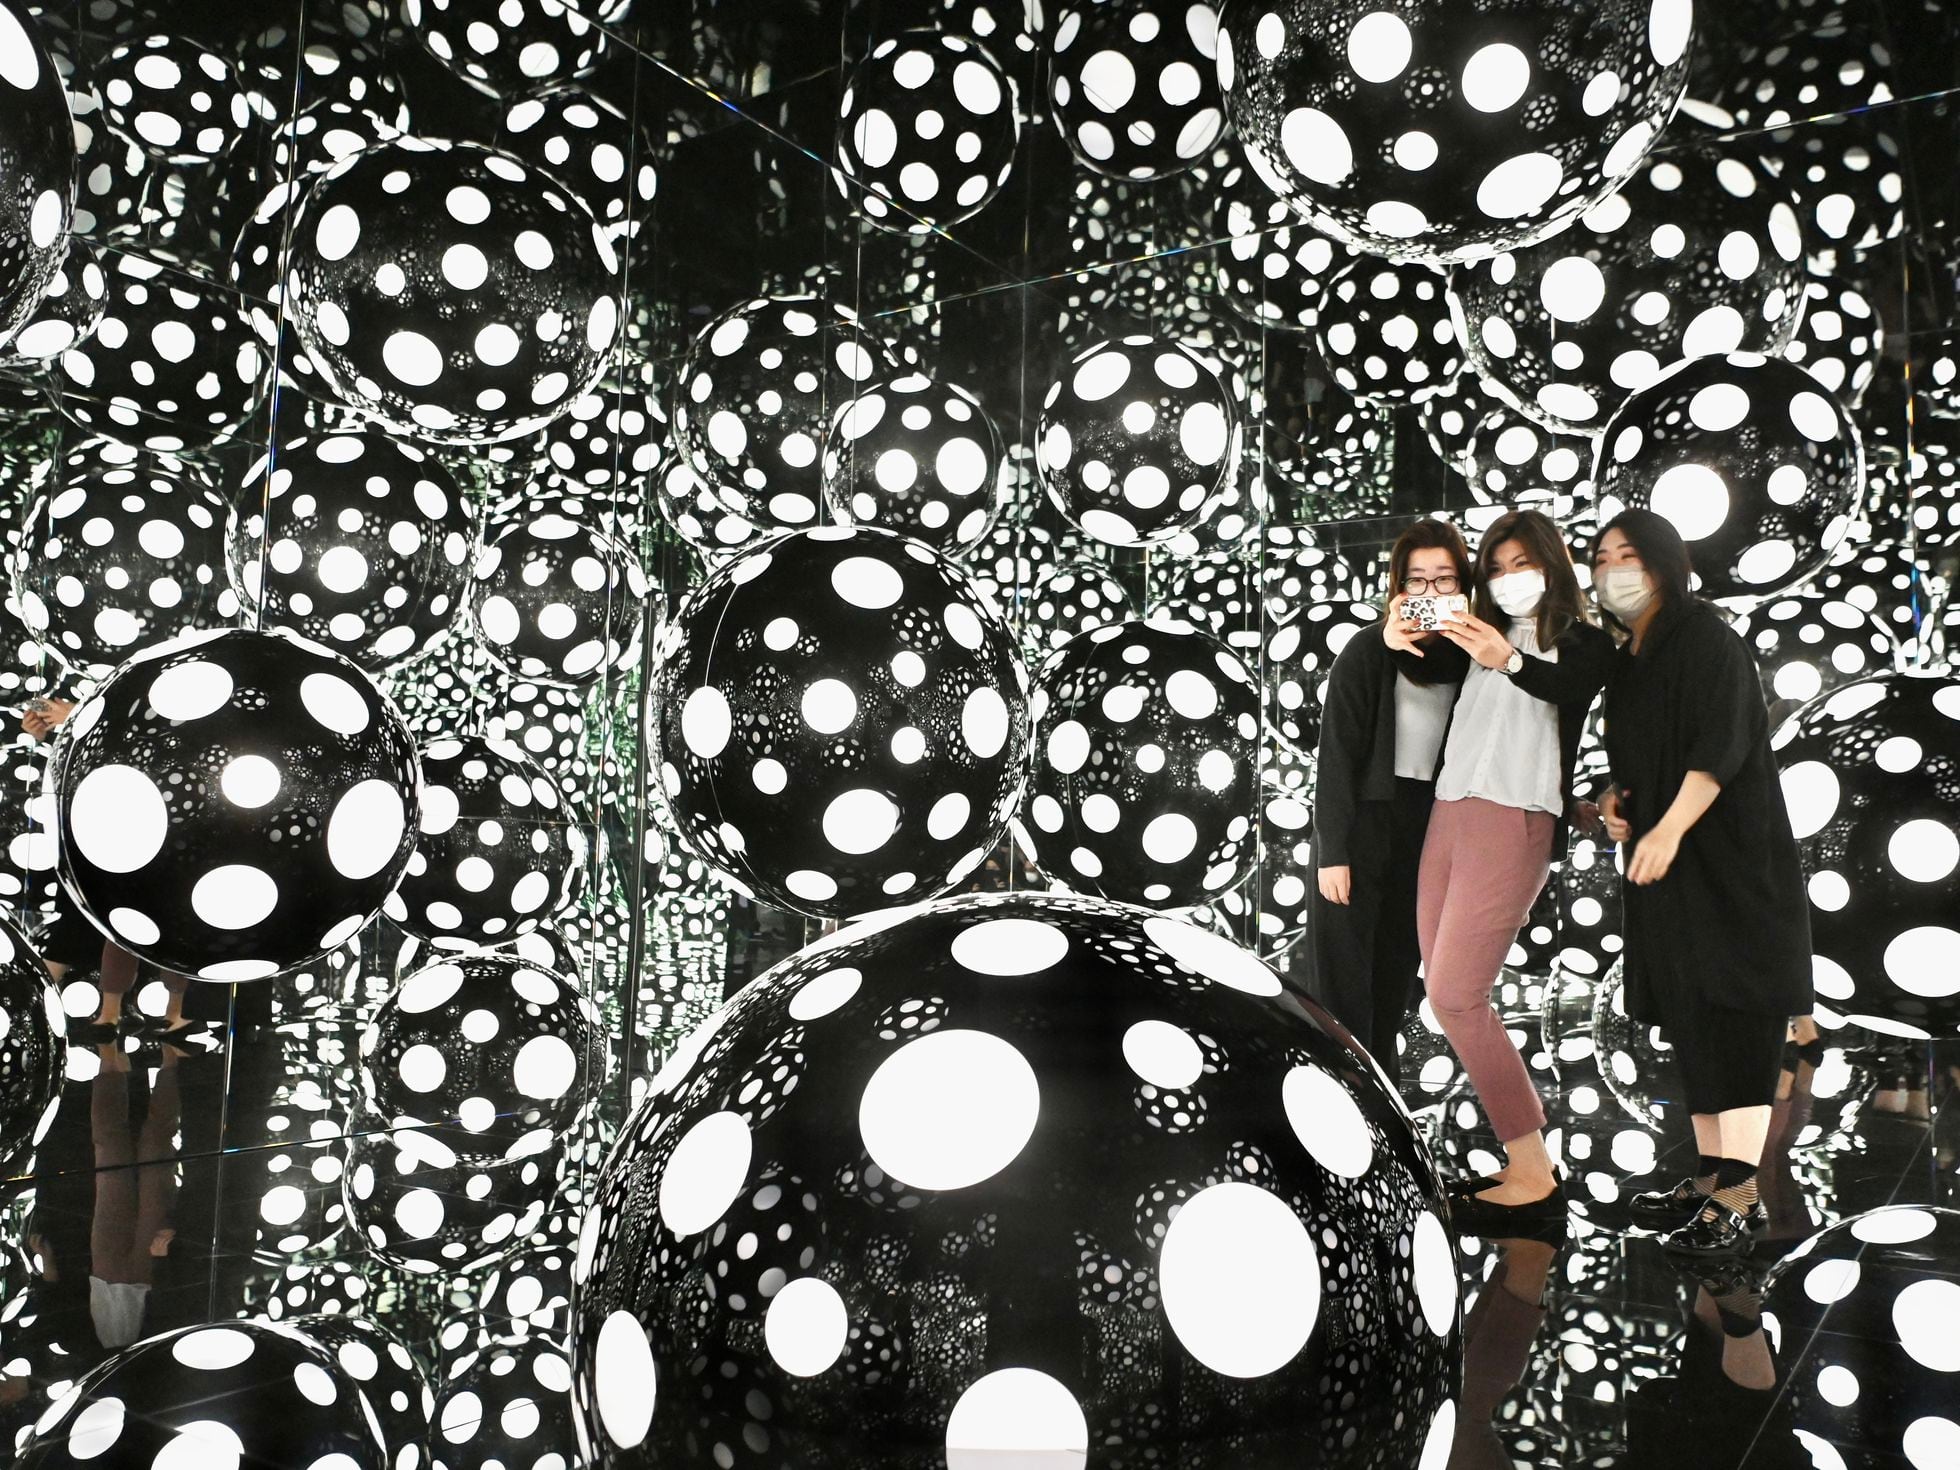 The famous polka dots of Yayoi Kusama are all over Louis Vuitton